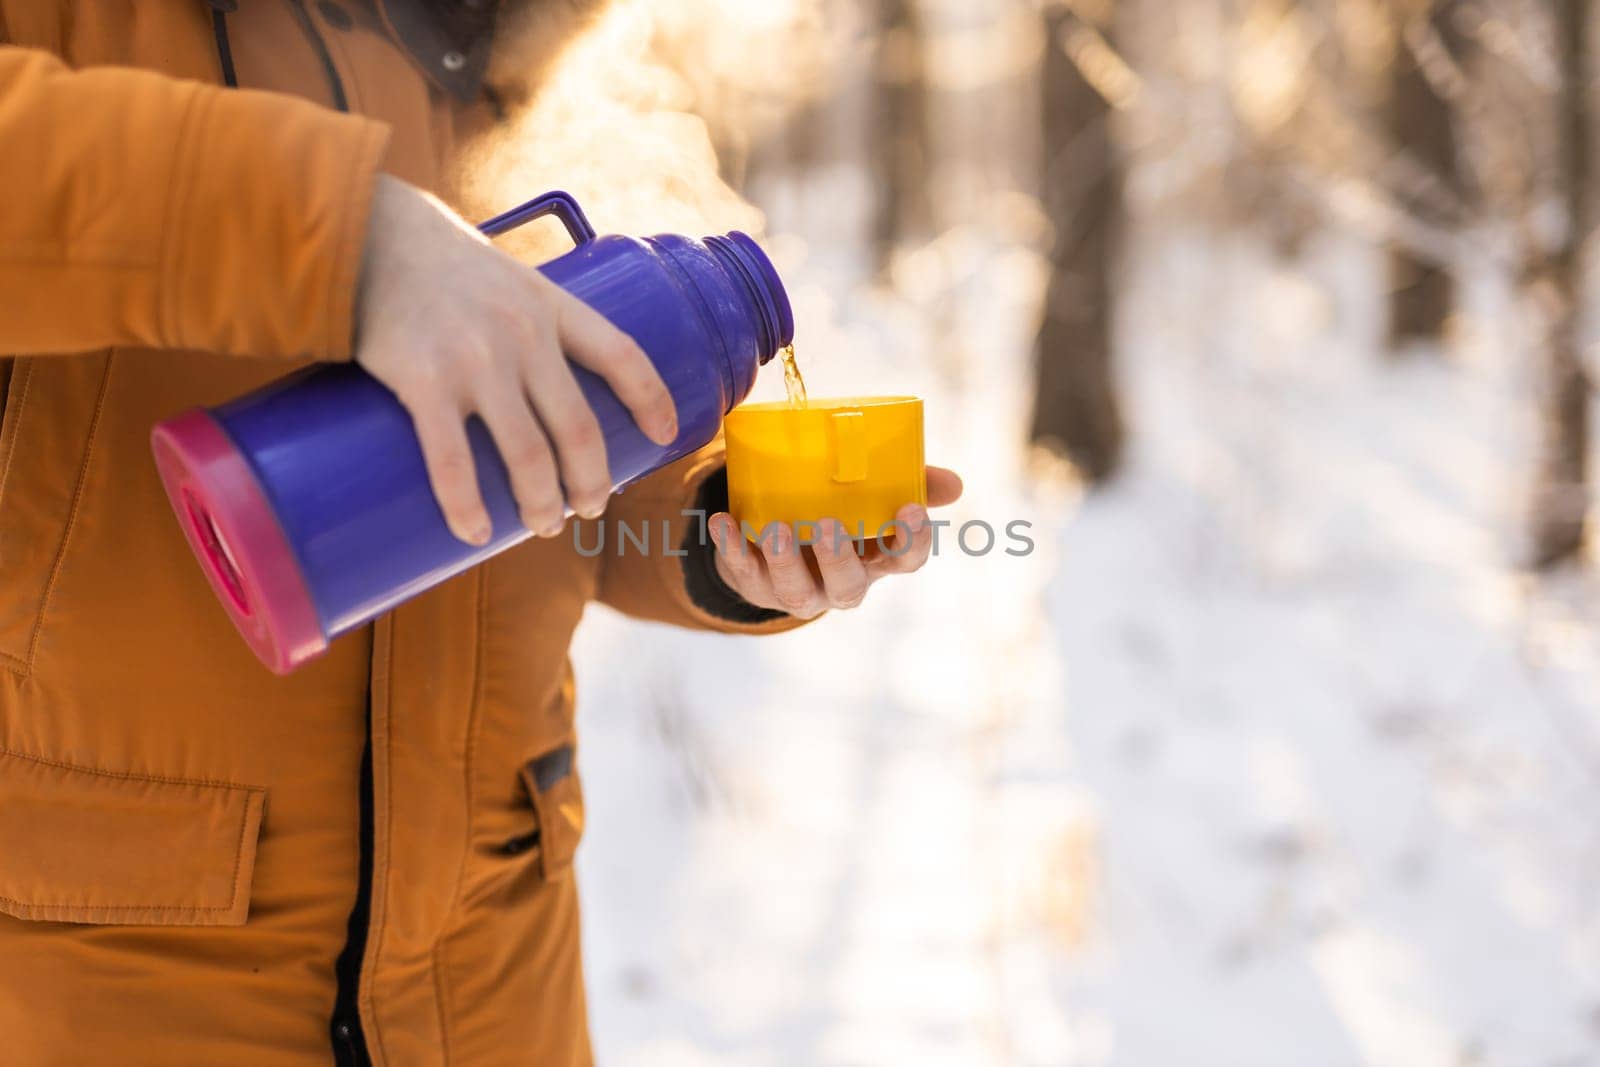 Man pours hot tea from a thermos into a snow walking in snowy frozen winter forest at sunset. Adventure, tourism and camping concept. Copy space and empty place for text advertising.